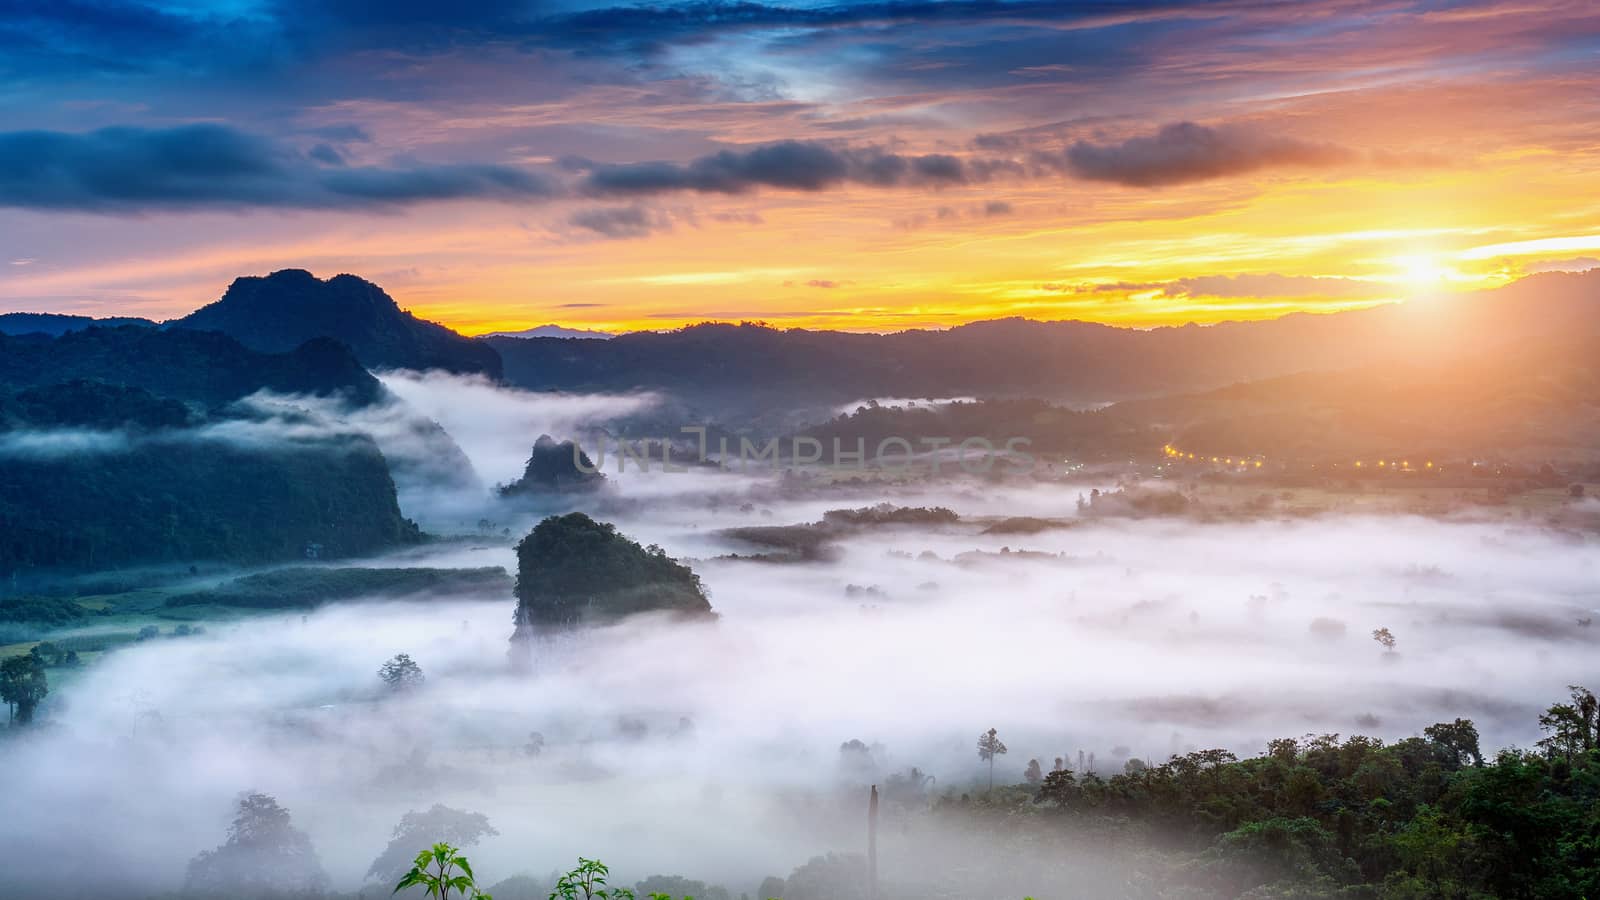 Sunrise on the morning mist at Phu Lang Ka, Phayao in Thailand. by gutarphotoghaphy